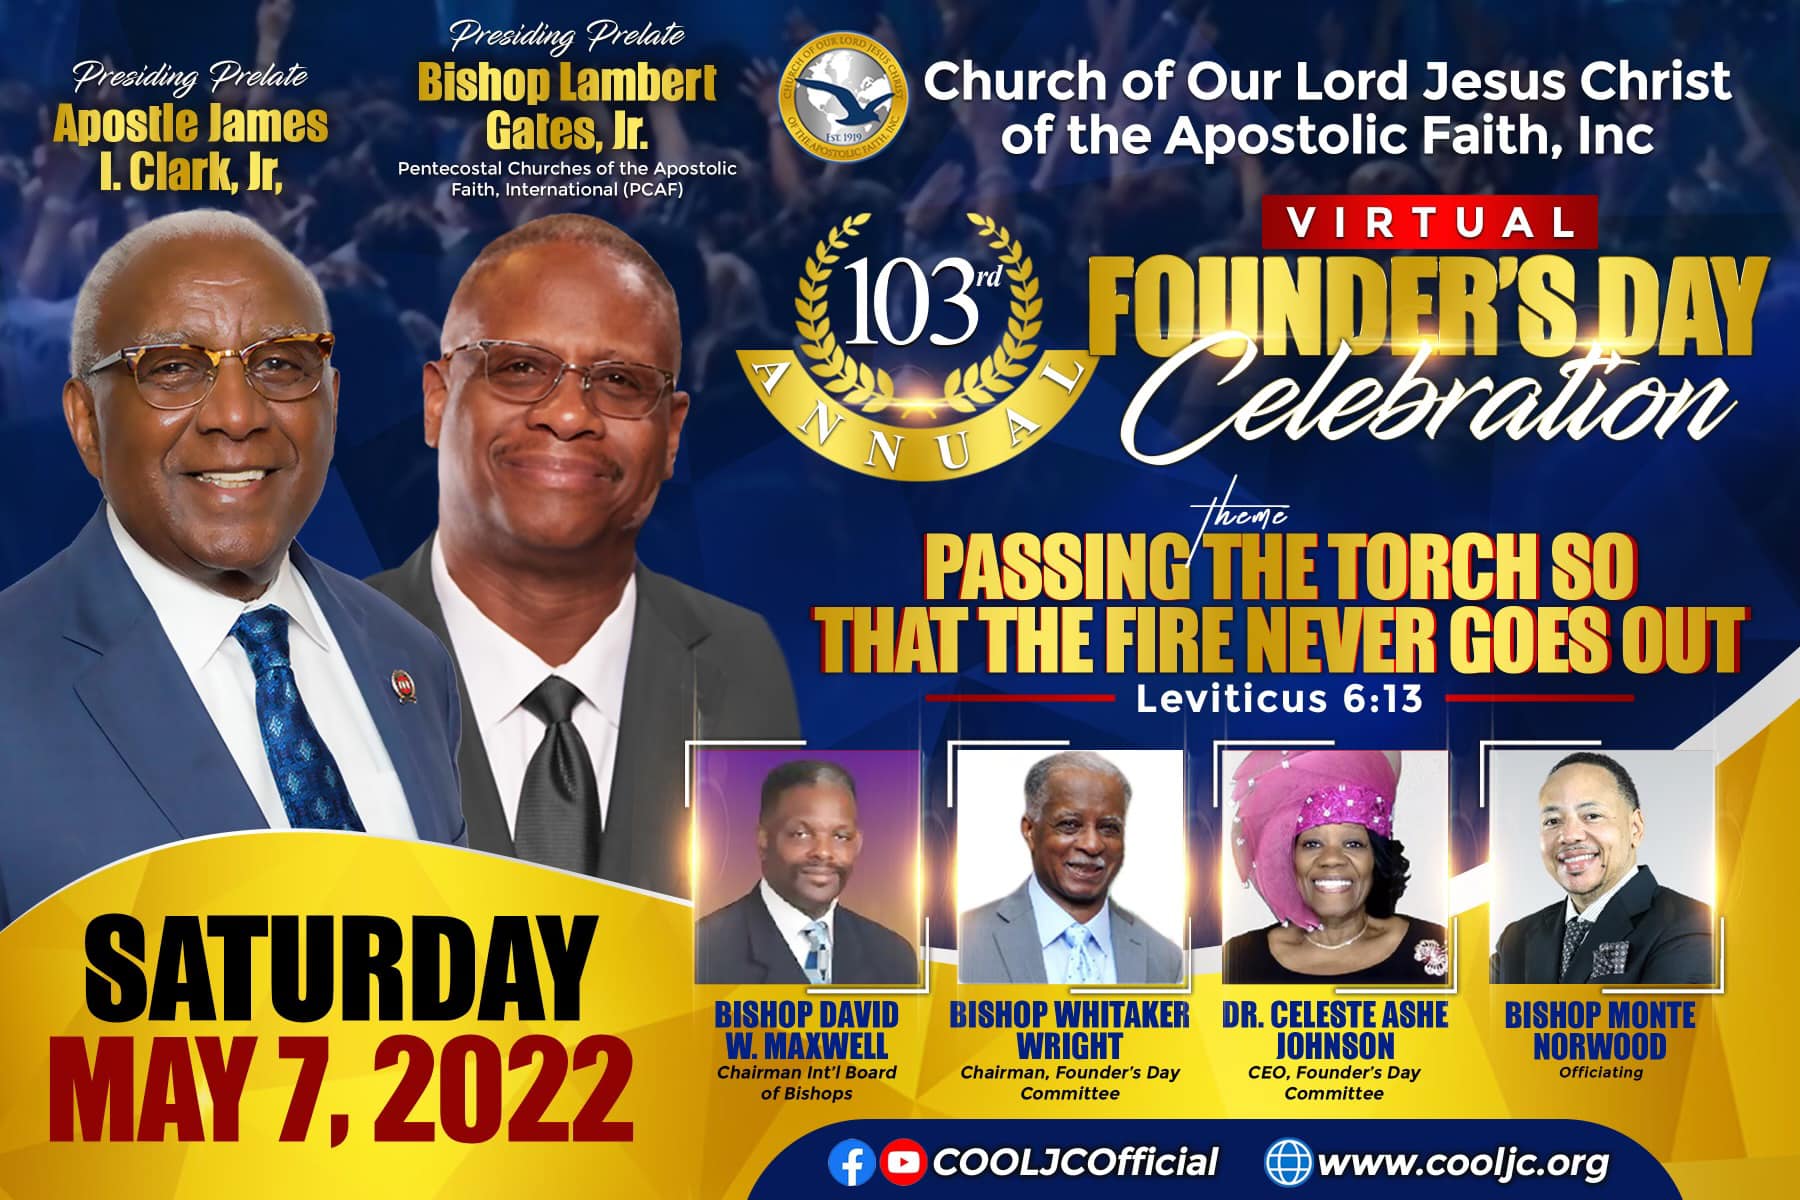 COOLJC - Annual Founder's Day Celebration - 2022 @ Church of Our Lord Jesus Christ of the Apostolic Faith, Inc. | New York | New York | United States